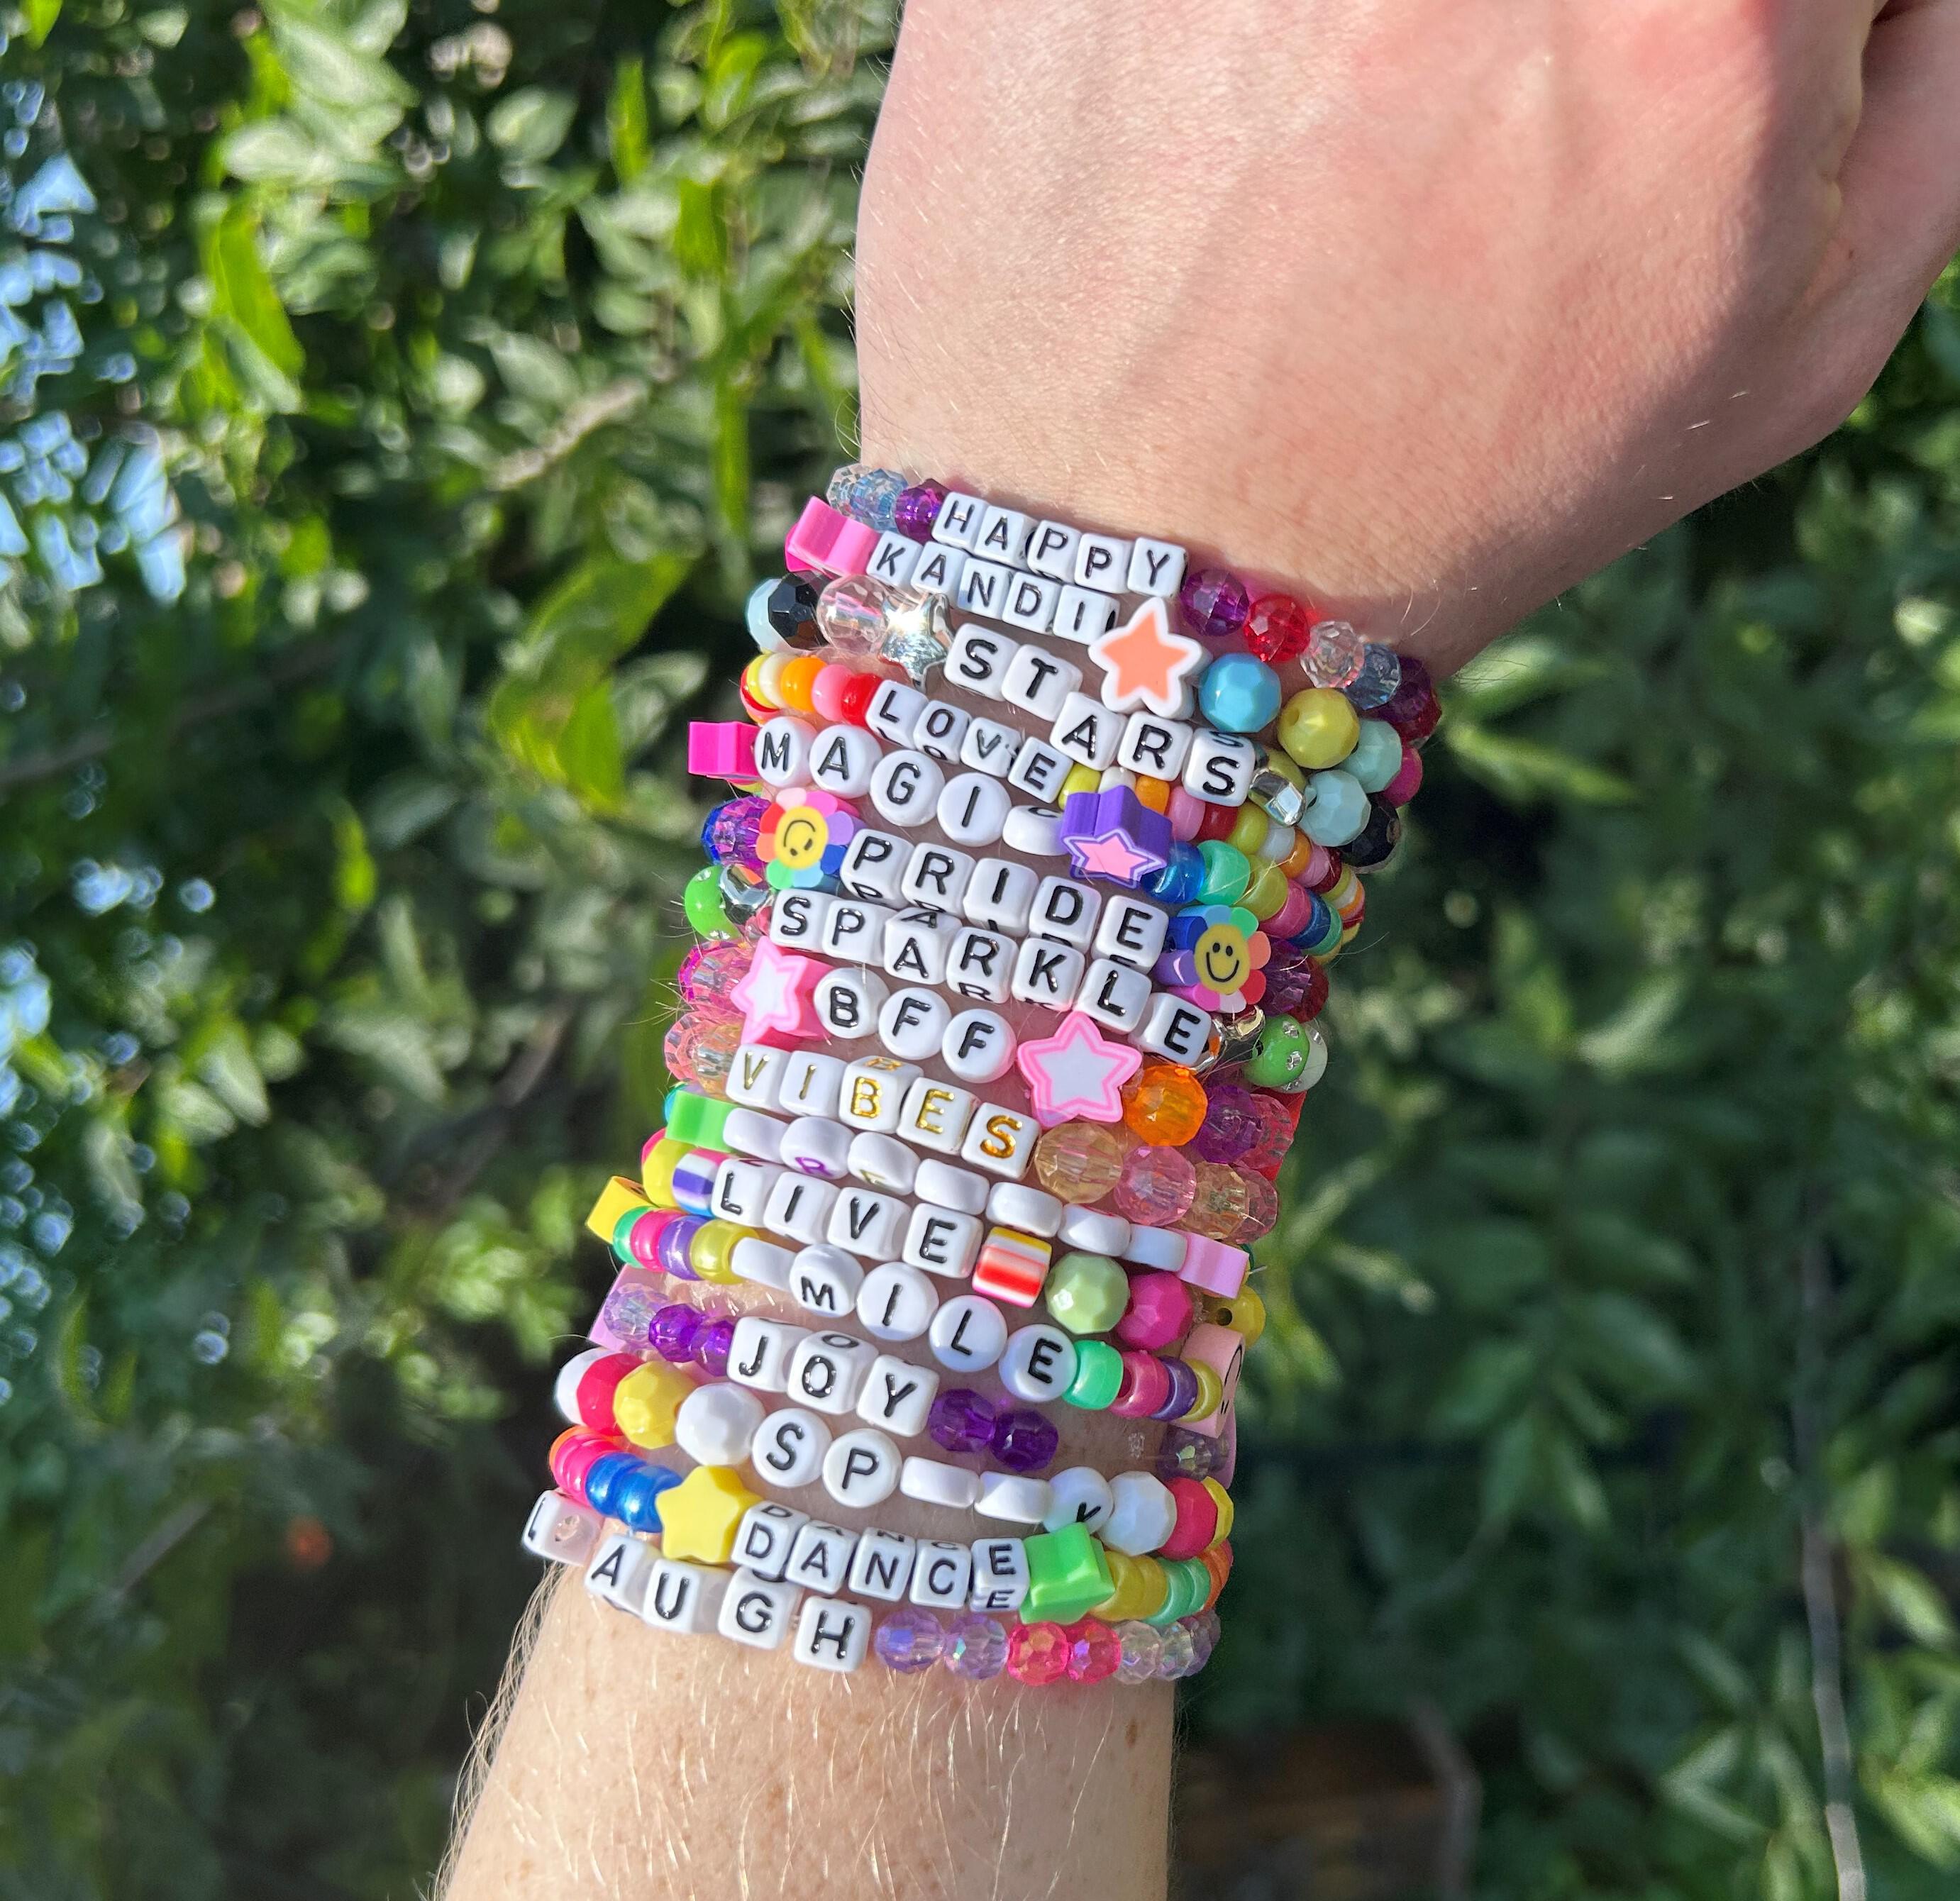 25 Kandi Ideas For Your Next Festival - Stage Hoppers